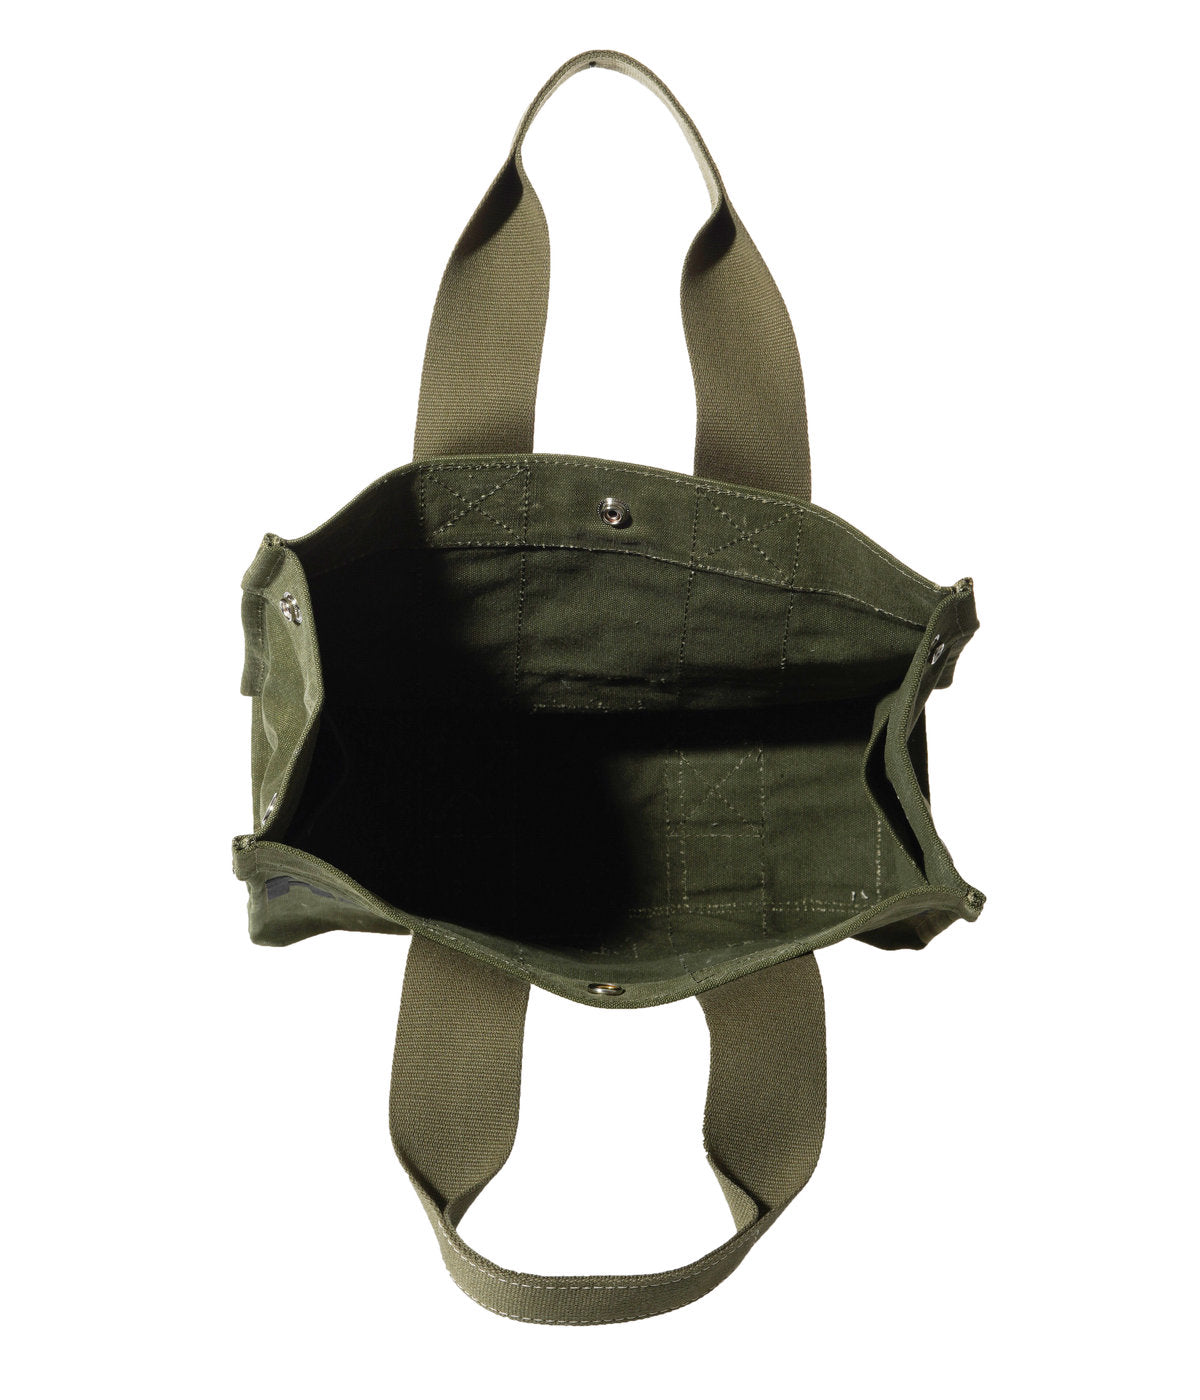 READYMADE EASY TOTE SMALL Khaki – unexpected store